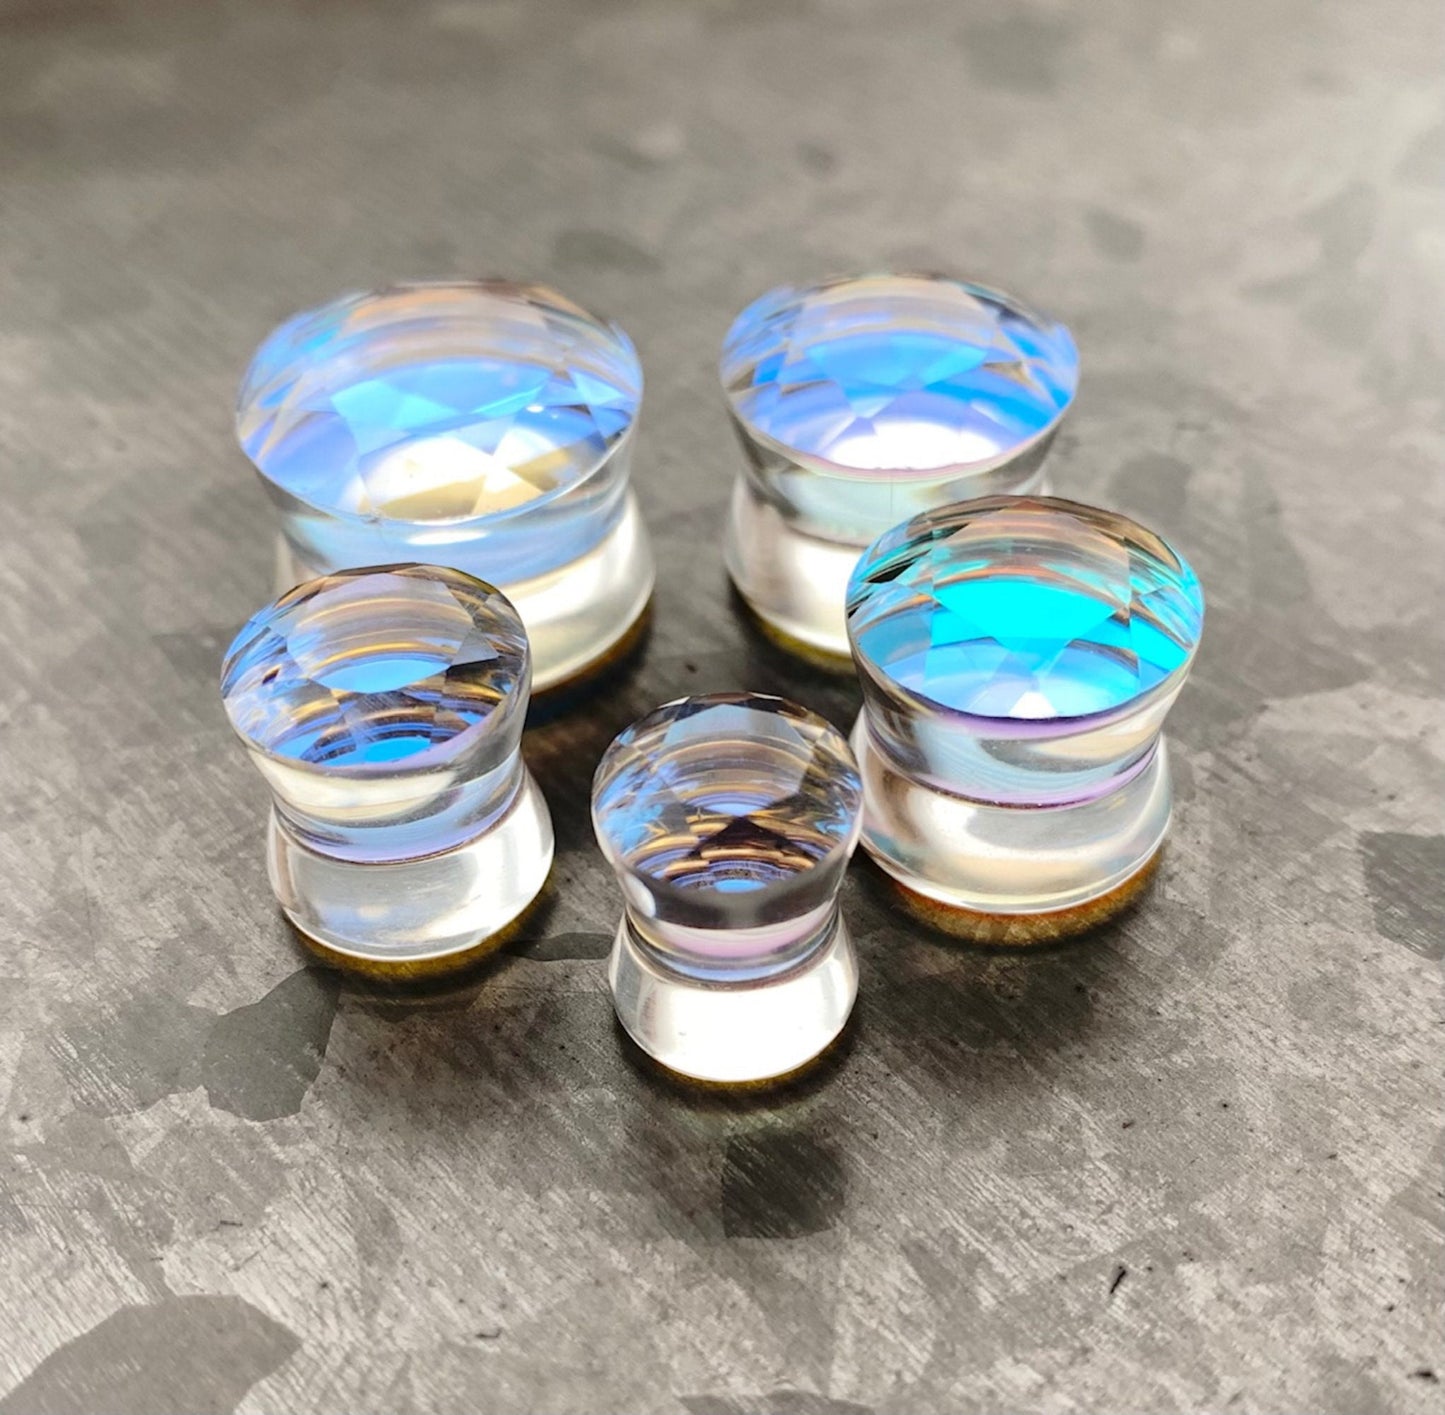 PAIR of Stunning Faceted Iridescent Glass Double Flare Plugs - Gauges 0g (8mm) through 5/8" (16mm) available!